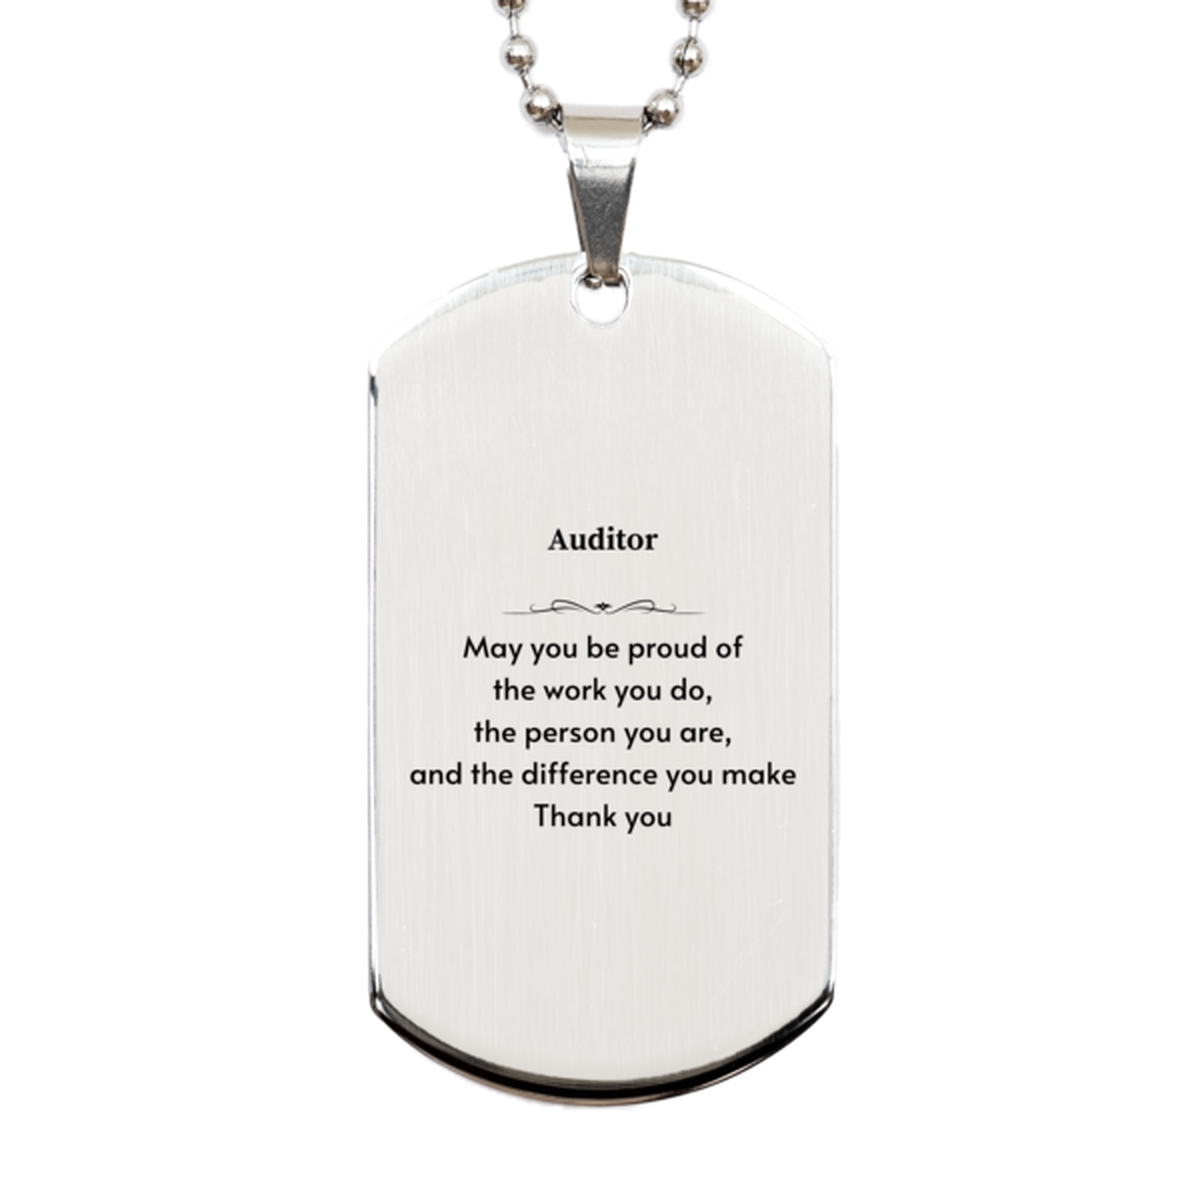 Heartwarming Silver Dog Tag Retirement Coworkers Gifts for Auditor, Auditor May You be proud of the work you do, the person you are Gifts for Boss Men Women Friends